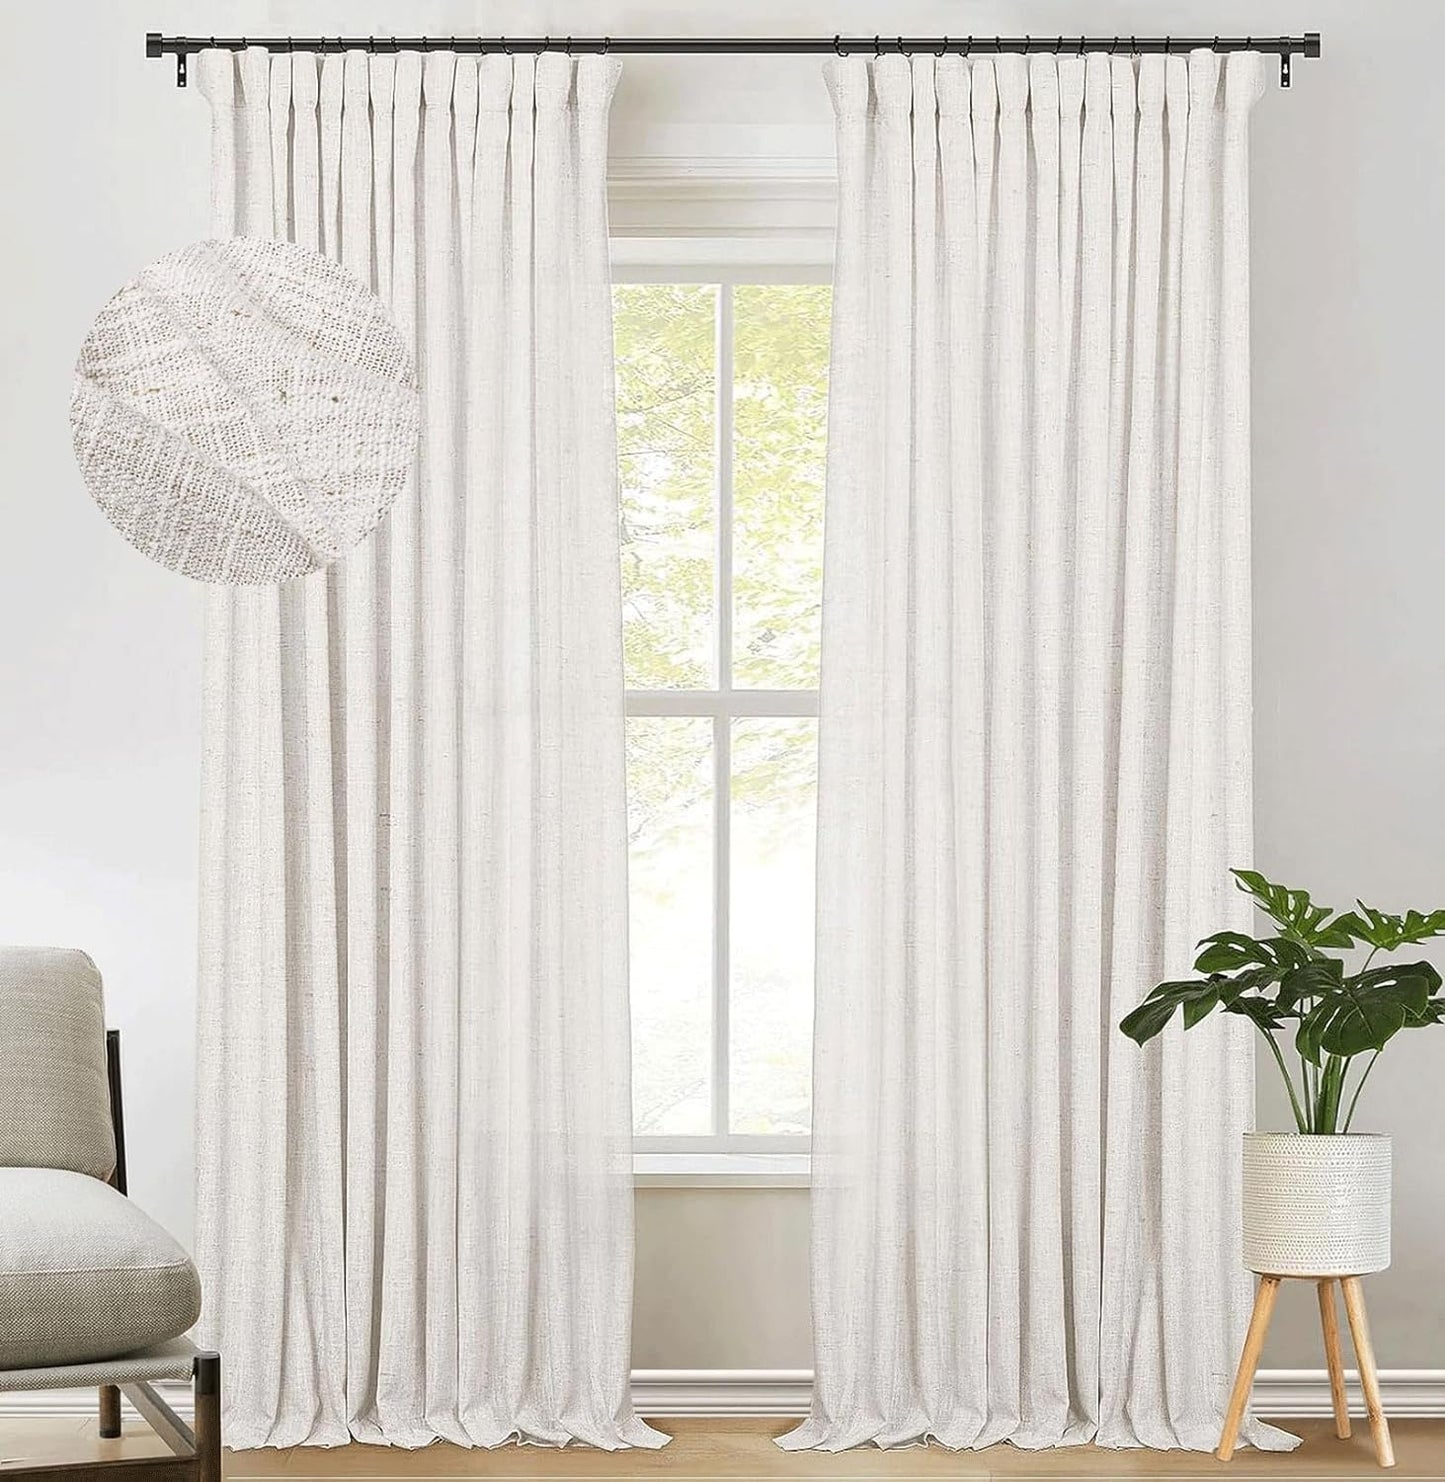 Zeerobee Beige White Linen Curtains for Living Room/Bedroom Linen Curtains 96 Inches Long 2 Panels Linen Drapes Farmhouse Pinch Pleated Curtains Light Filtering Privacy Curtains, W50 X L96  zeerobee 03 Linen 50"W X 90"L 